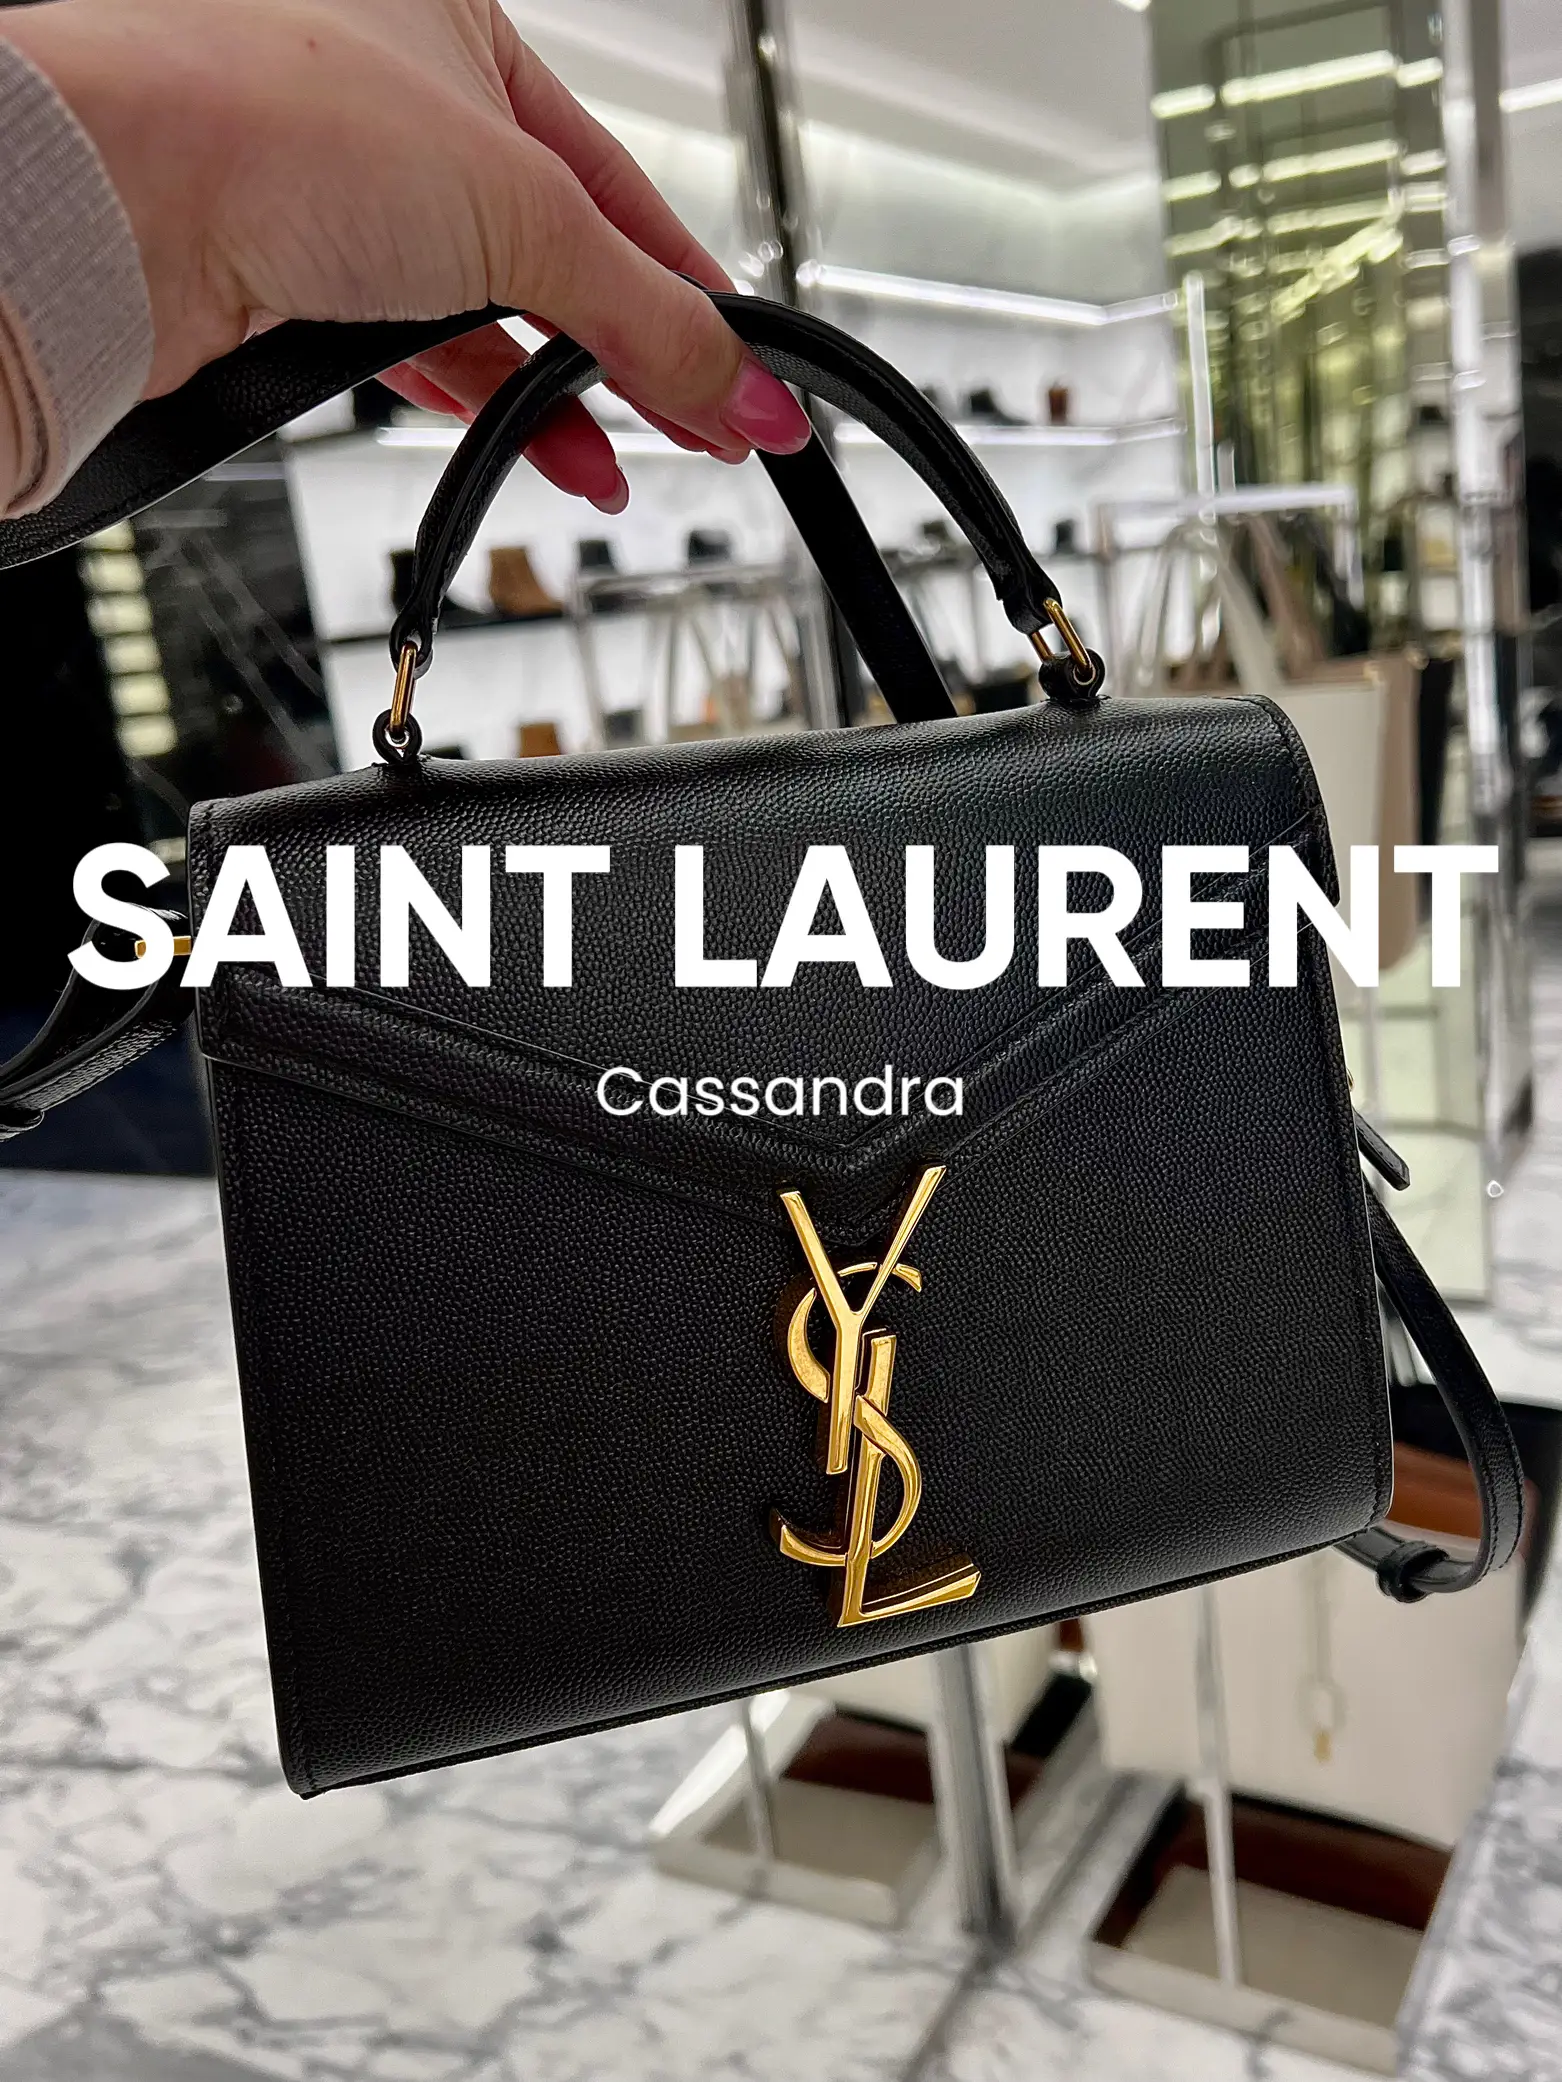 YSL MONOGRAMME SATCHEL REVIEW + TRY ON + WHAT FITS IN